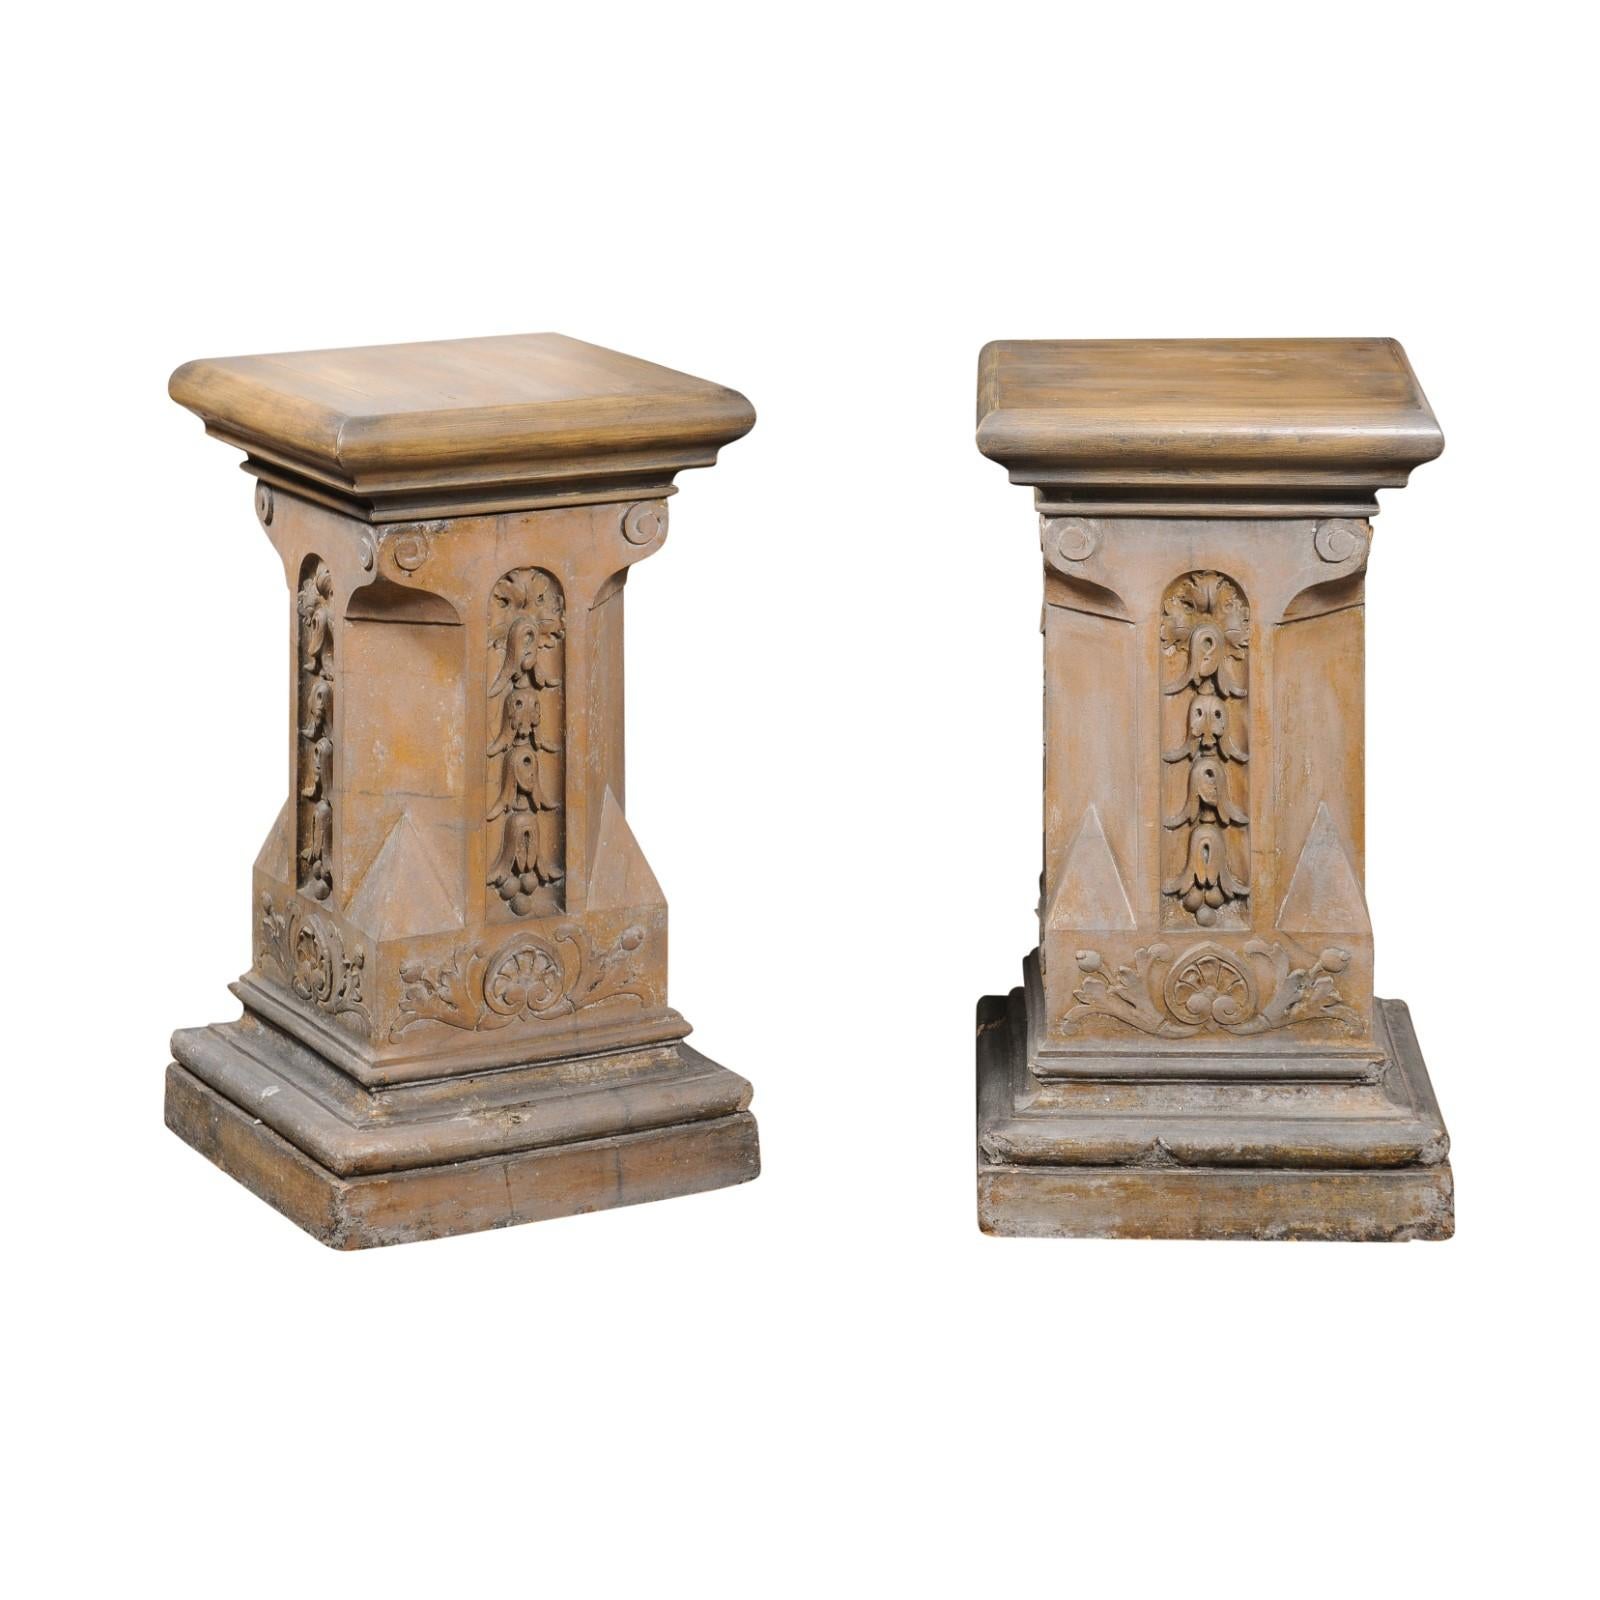 A pair of English Victorian period terracotta pedestals from the late 19th century with campanula, foliage and volute motifs on square bases. Created in England during the long reign of Queen Victoria in the third quarter of the 19th century, each